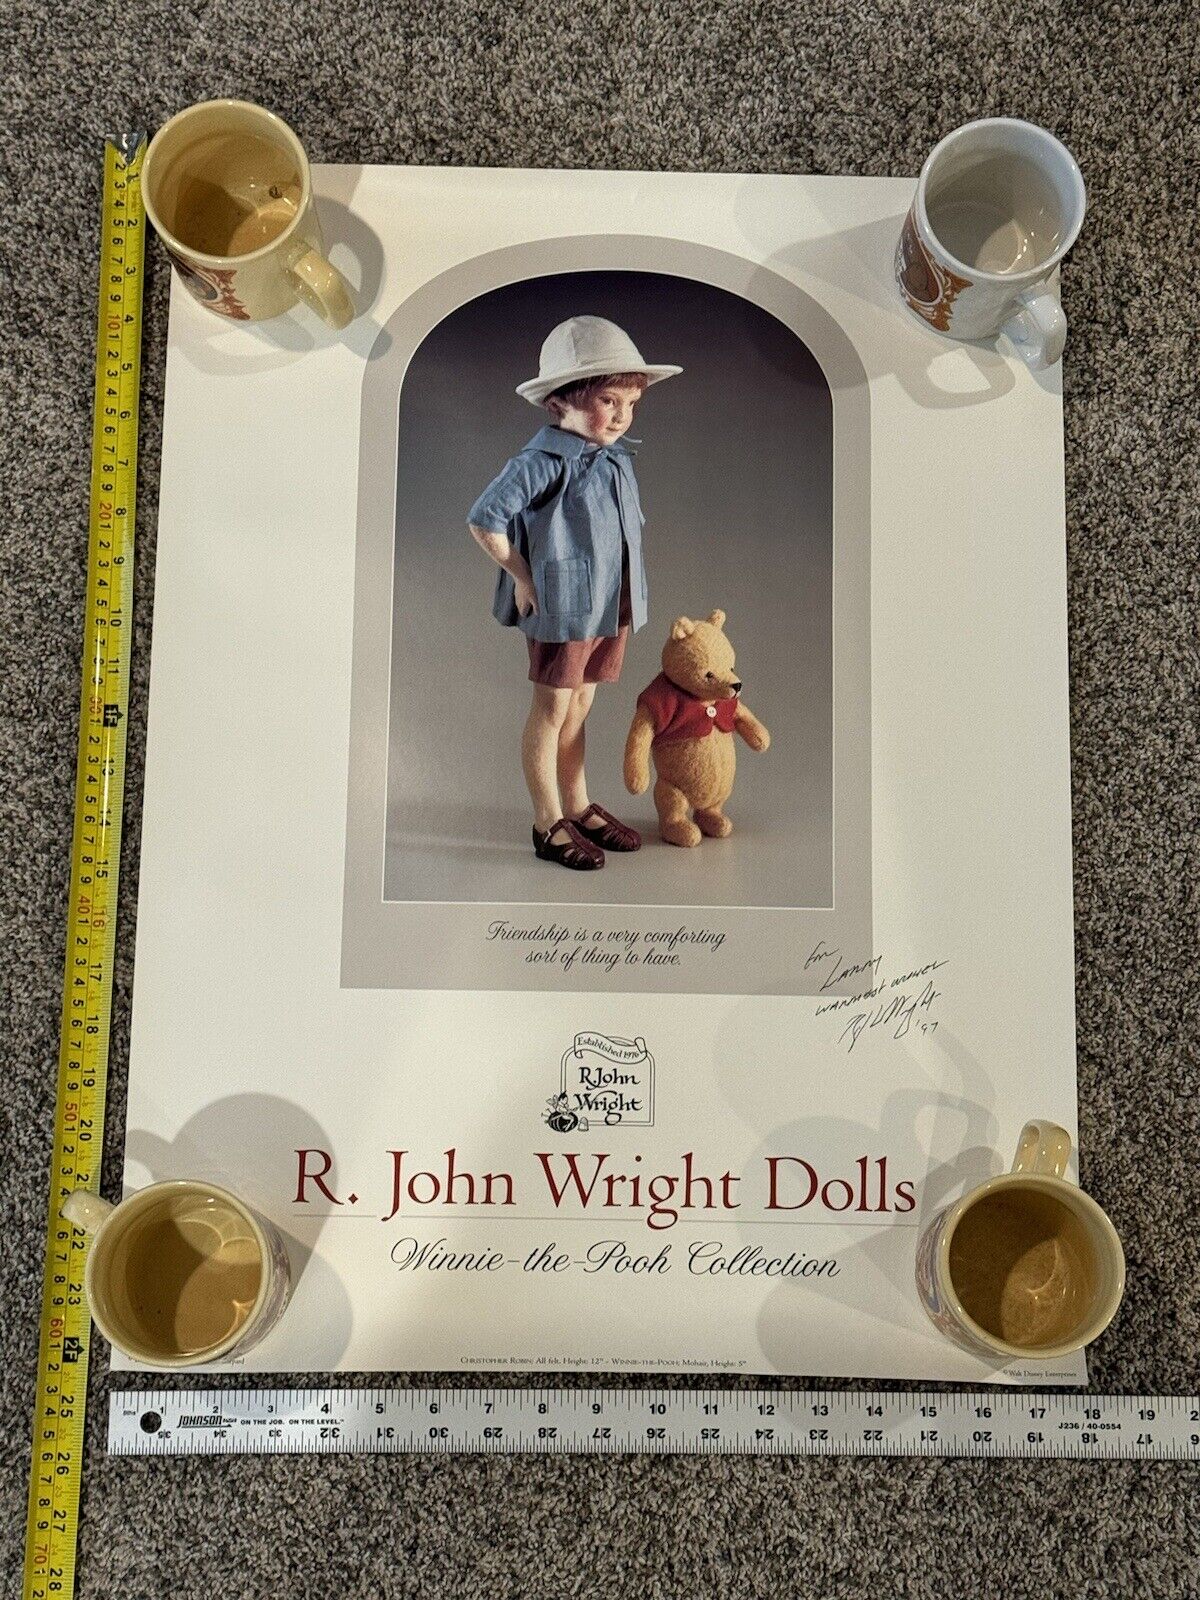 R. John Wright Dolls Winnie The Pooh Collection Poster Autographed  1997